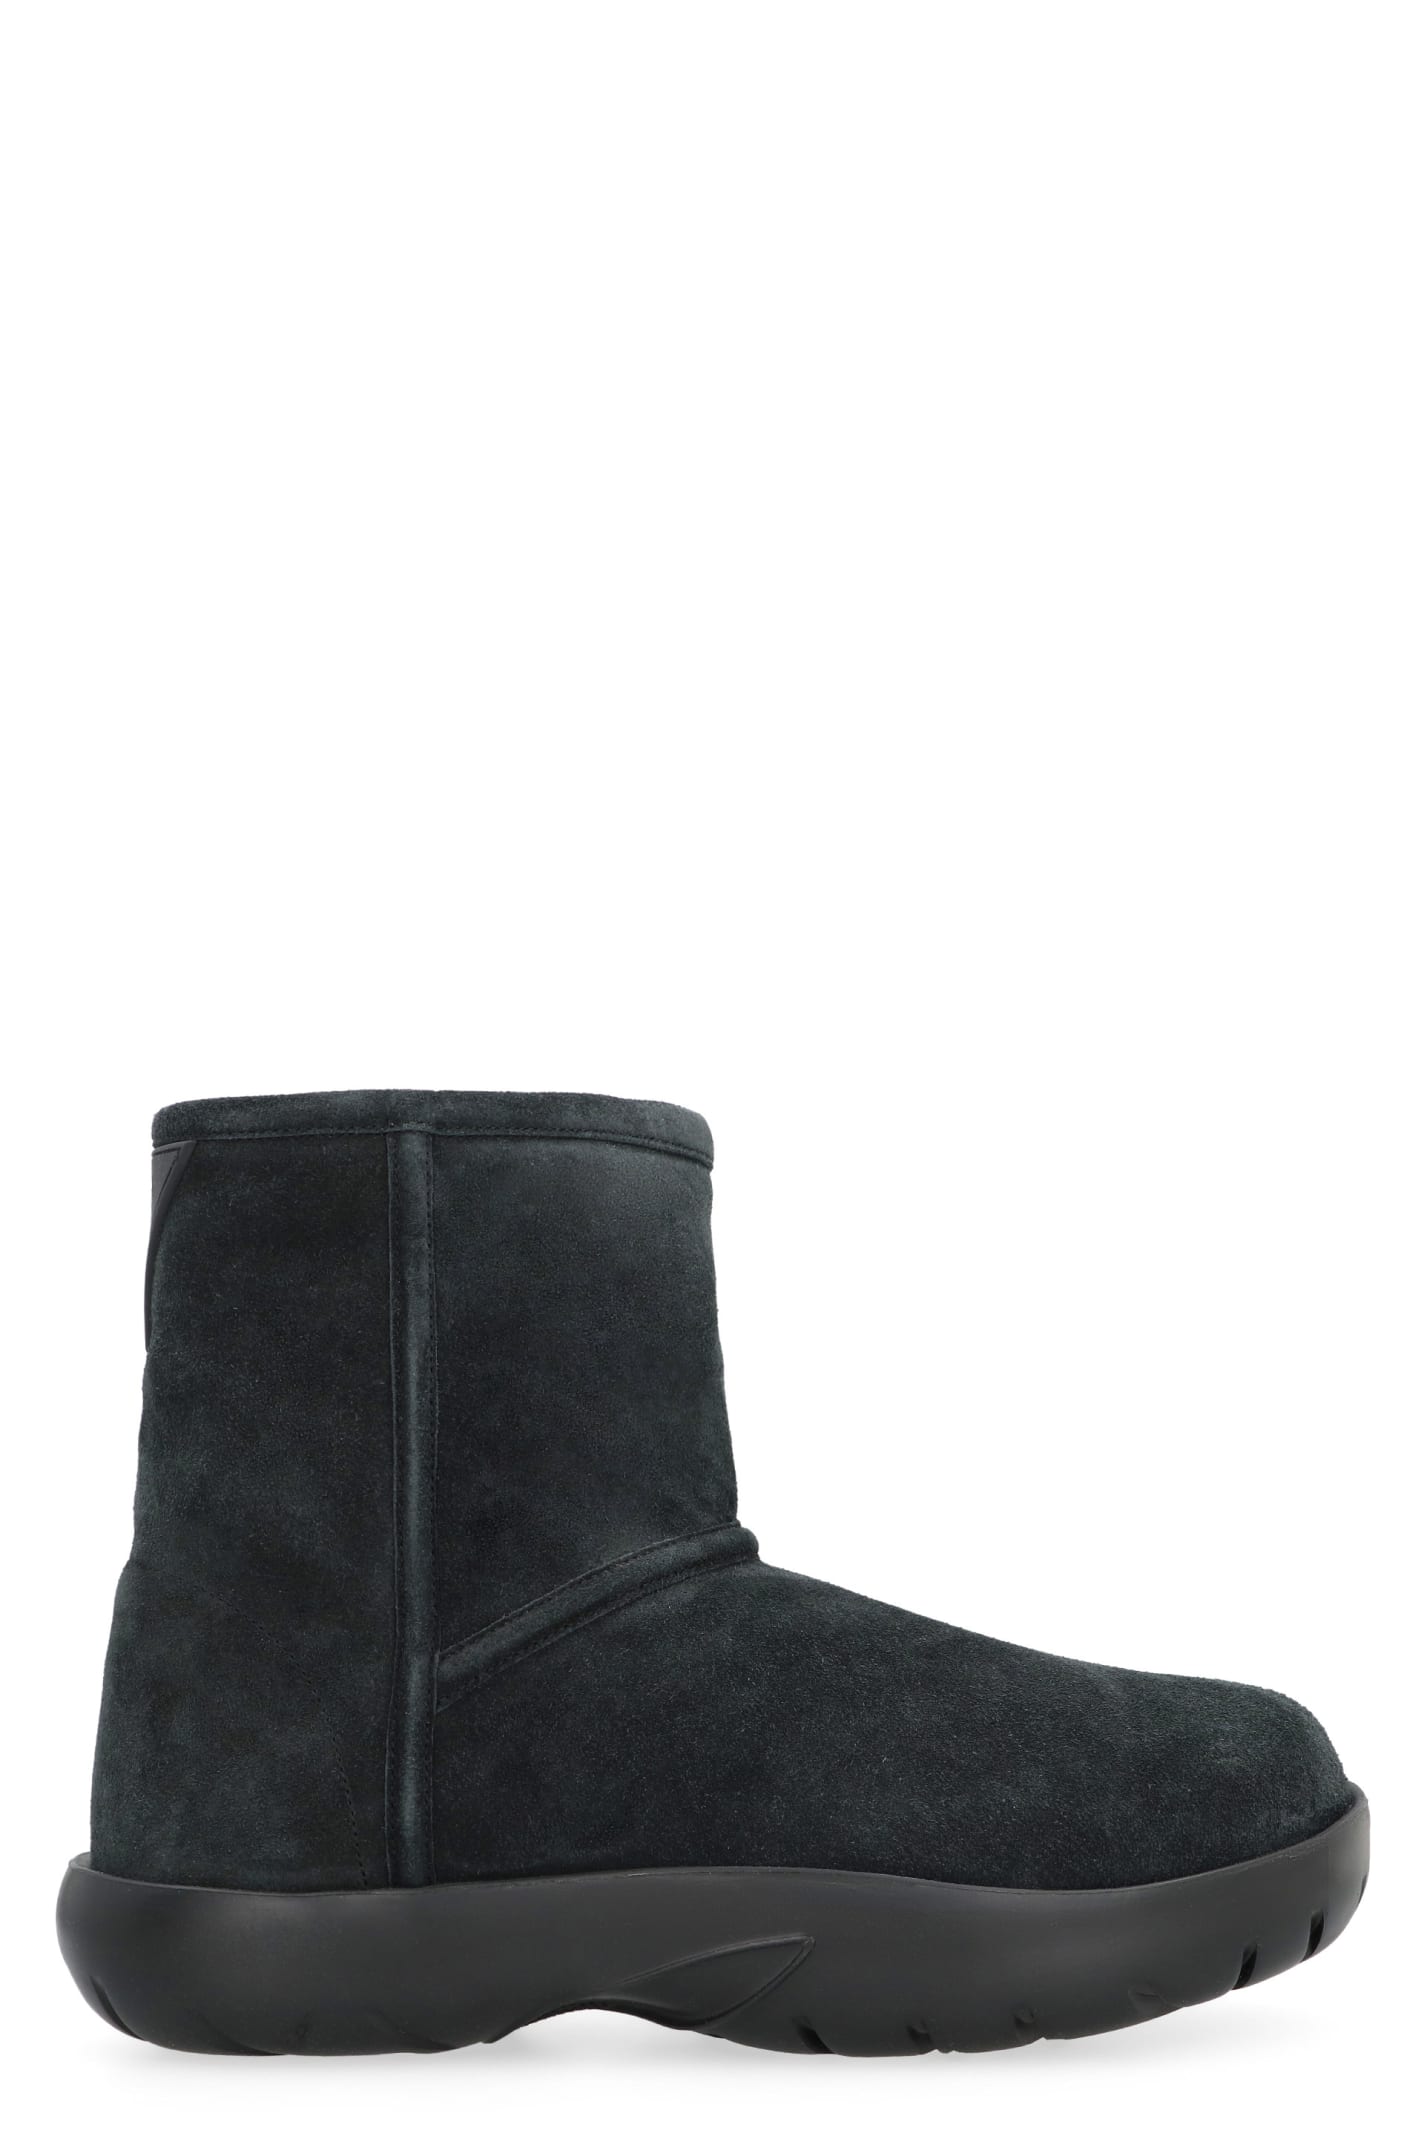 Snap Ankle Boots